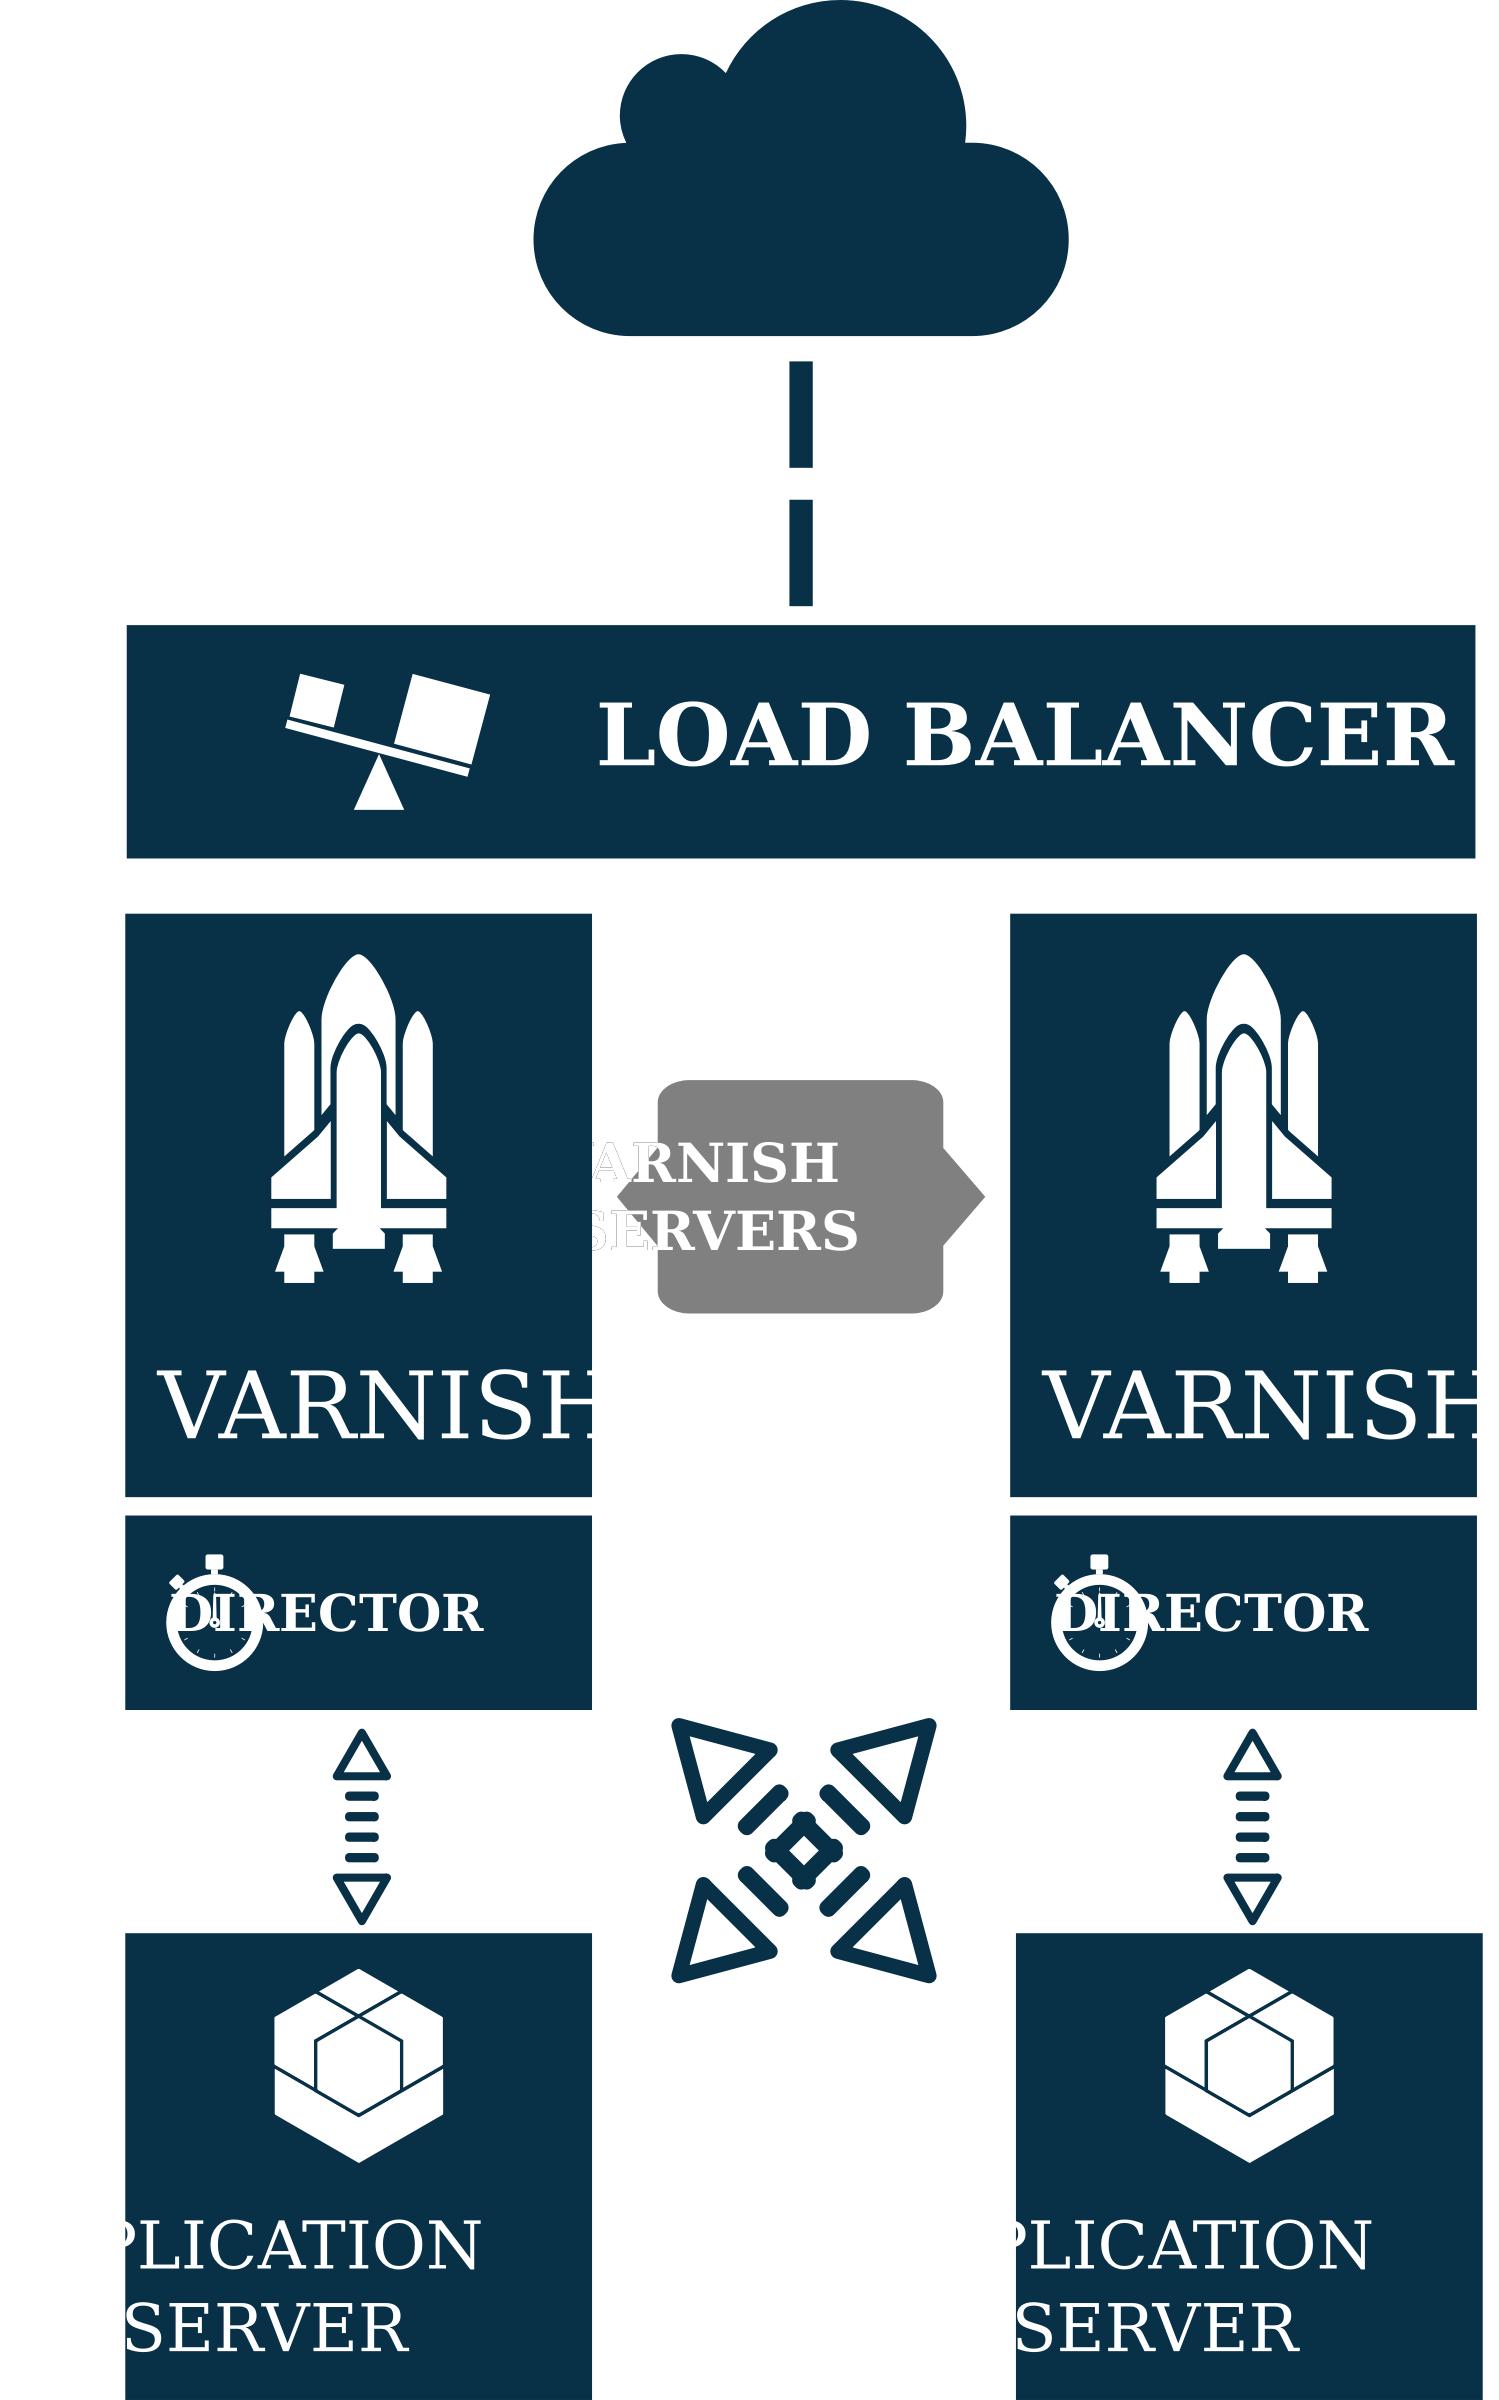 Varnish architecture png